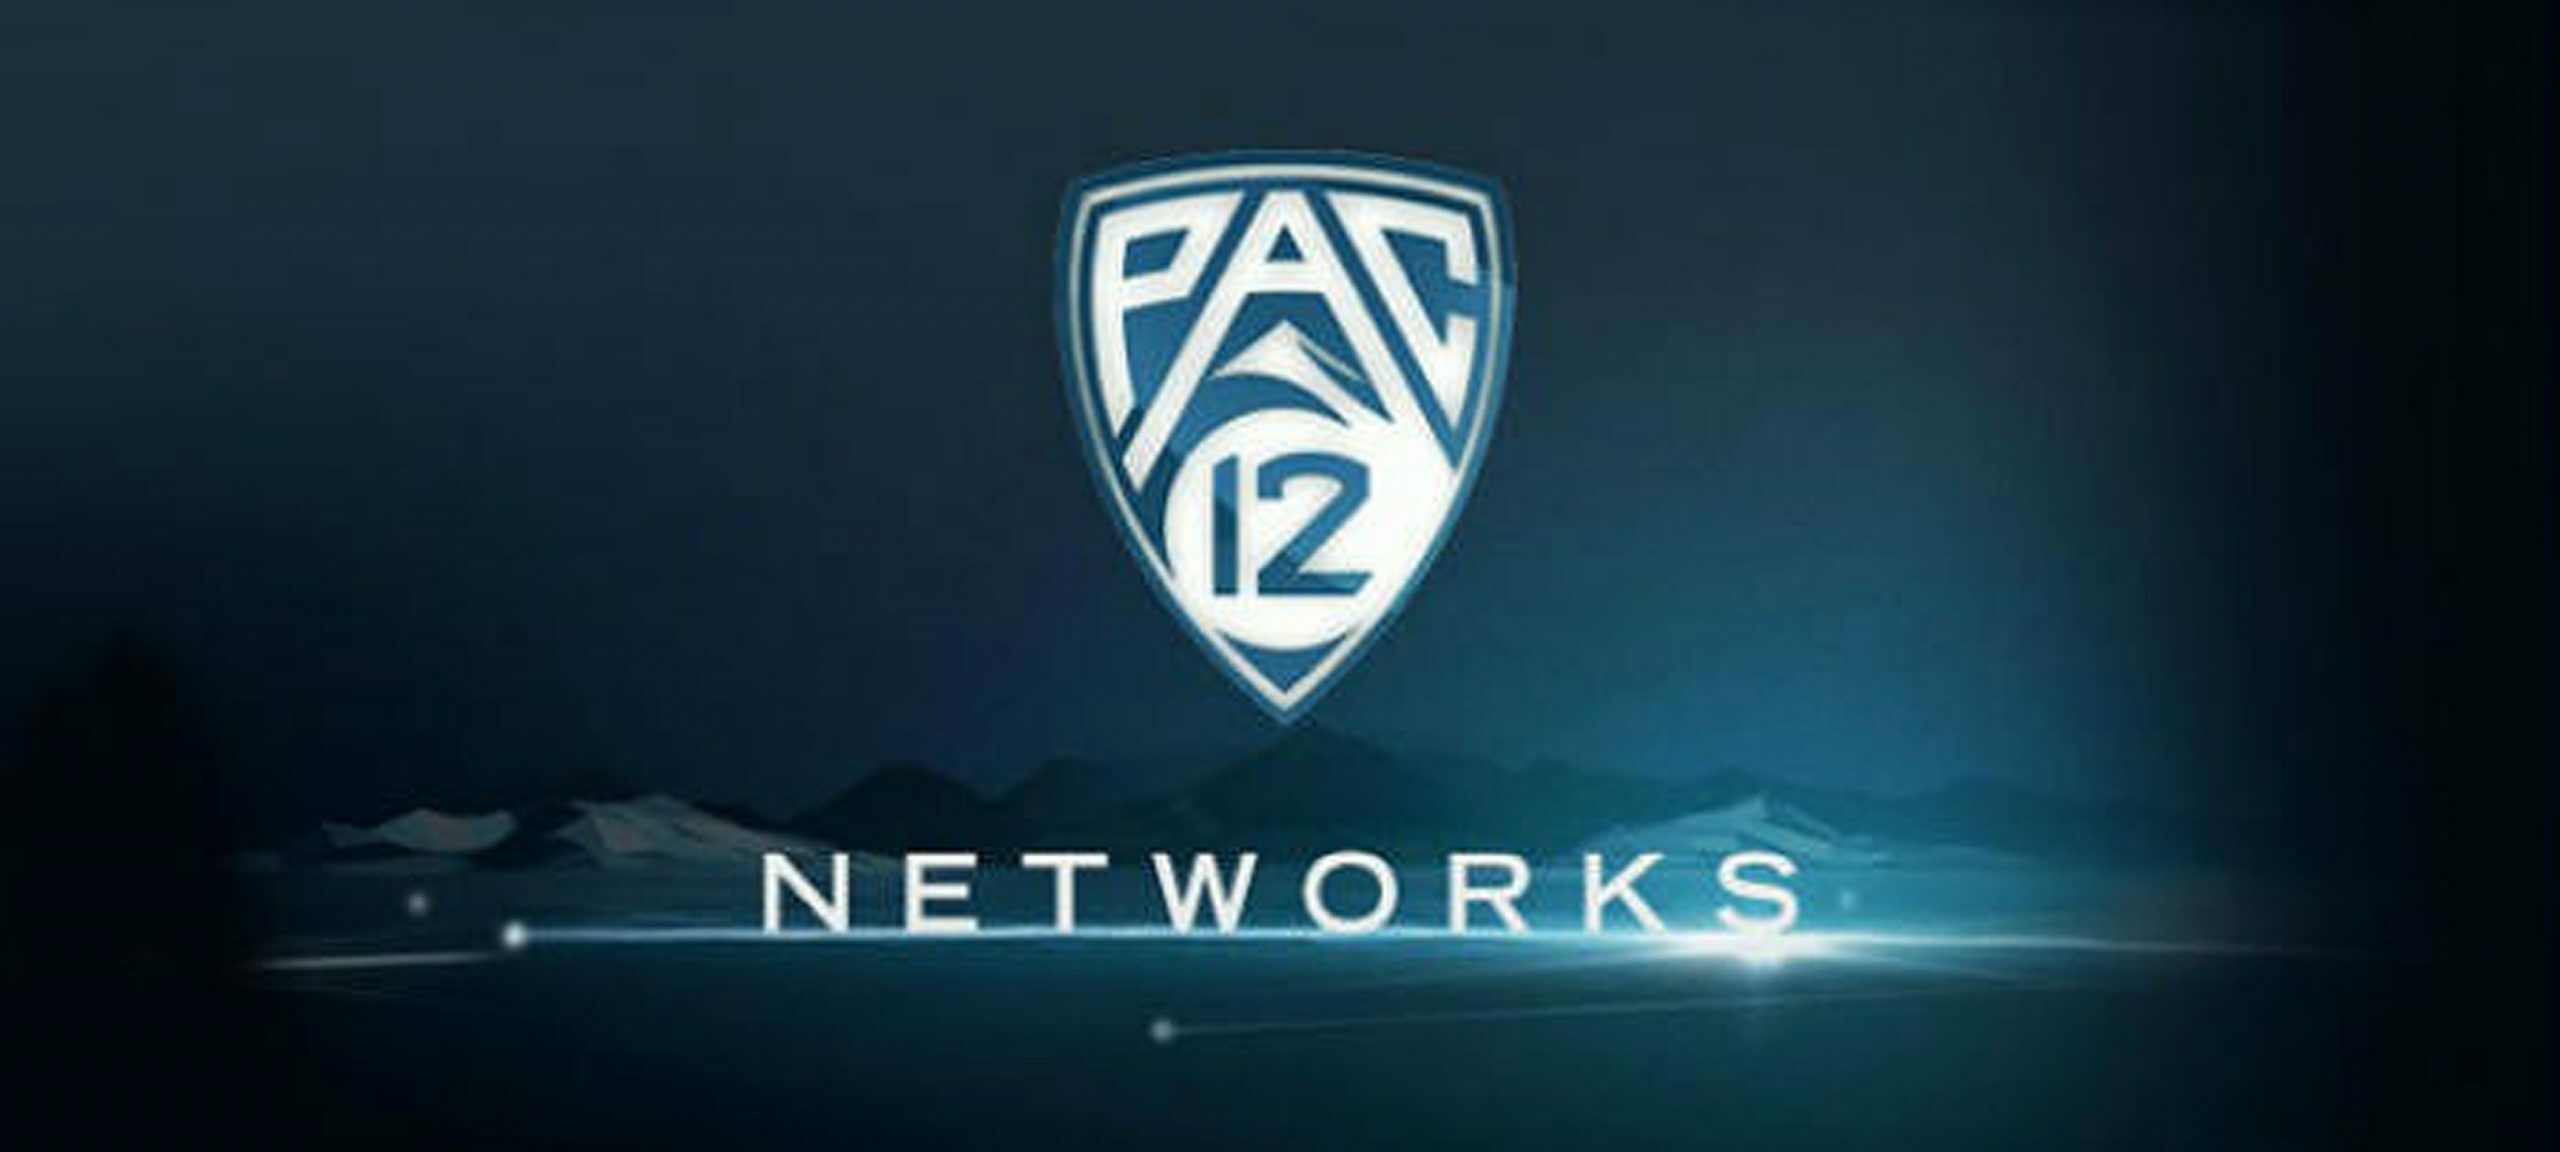 Pac-12’s TV Deal Hits a Snag As Streaming Becomes More Likely